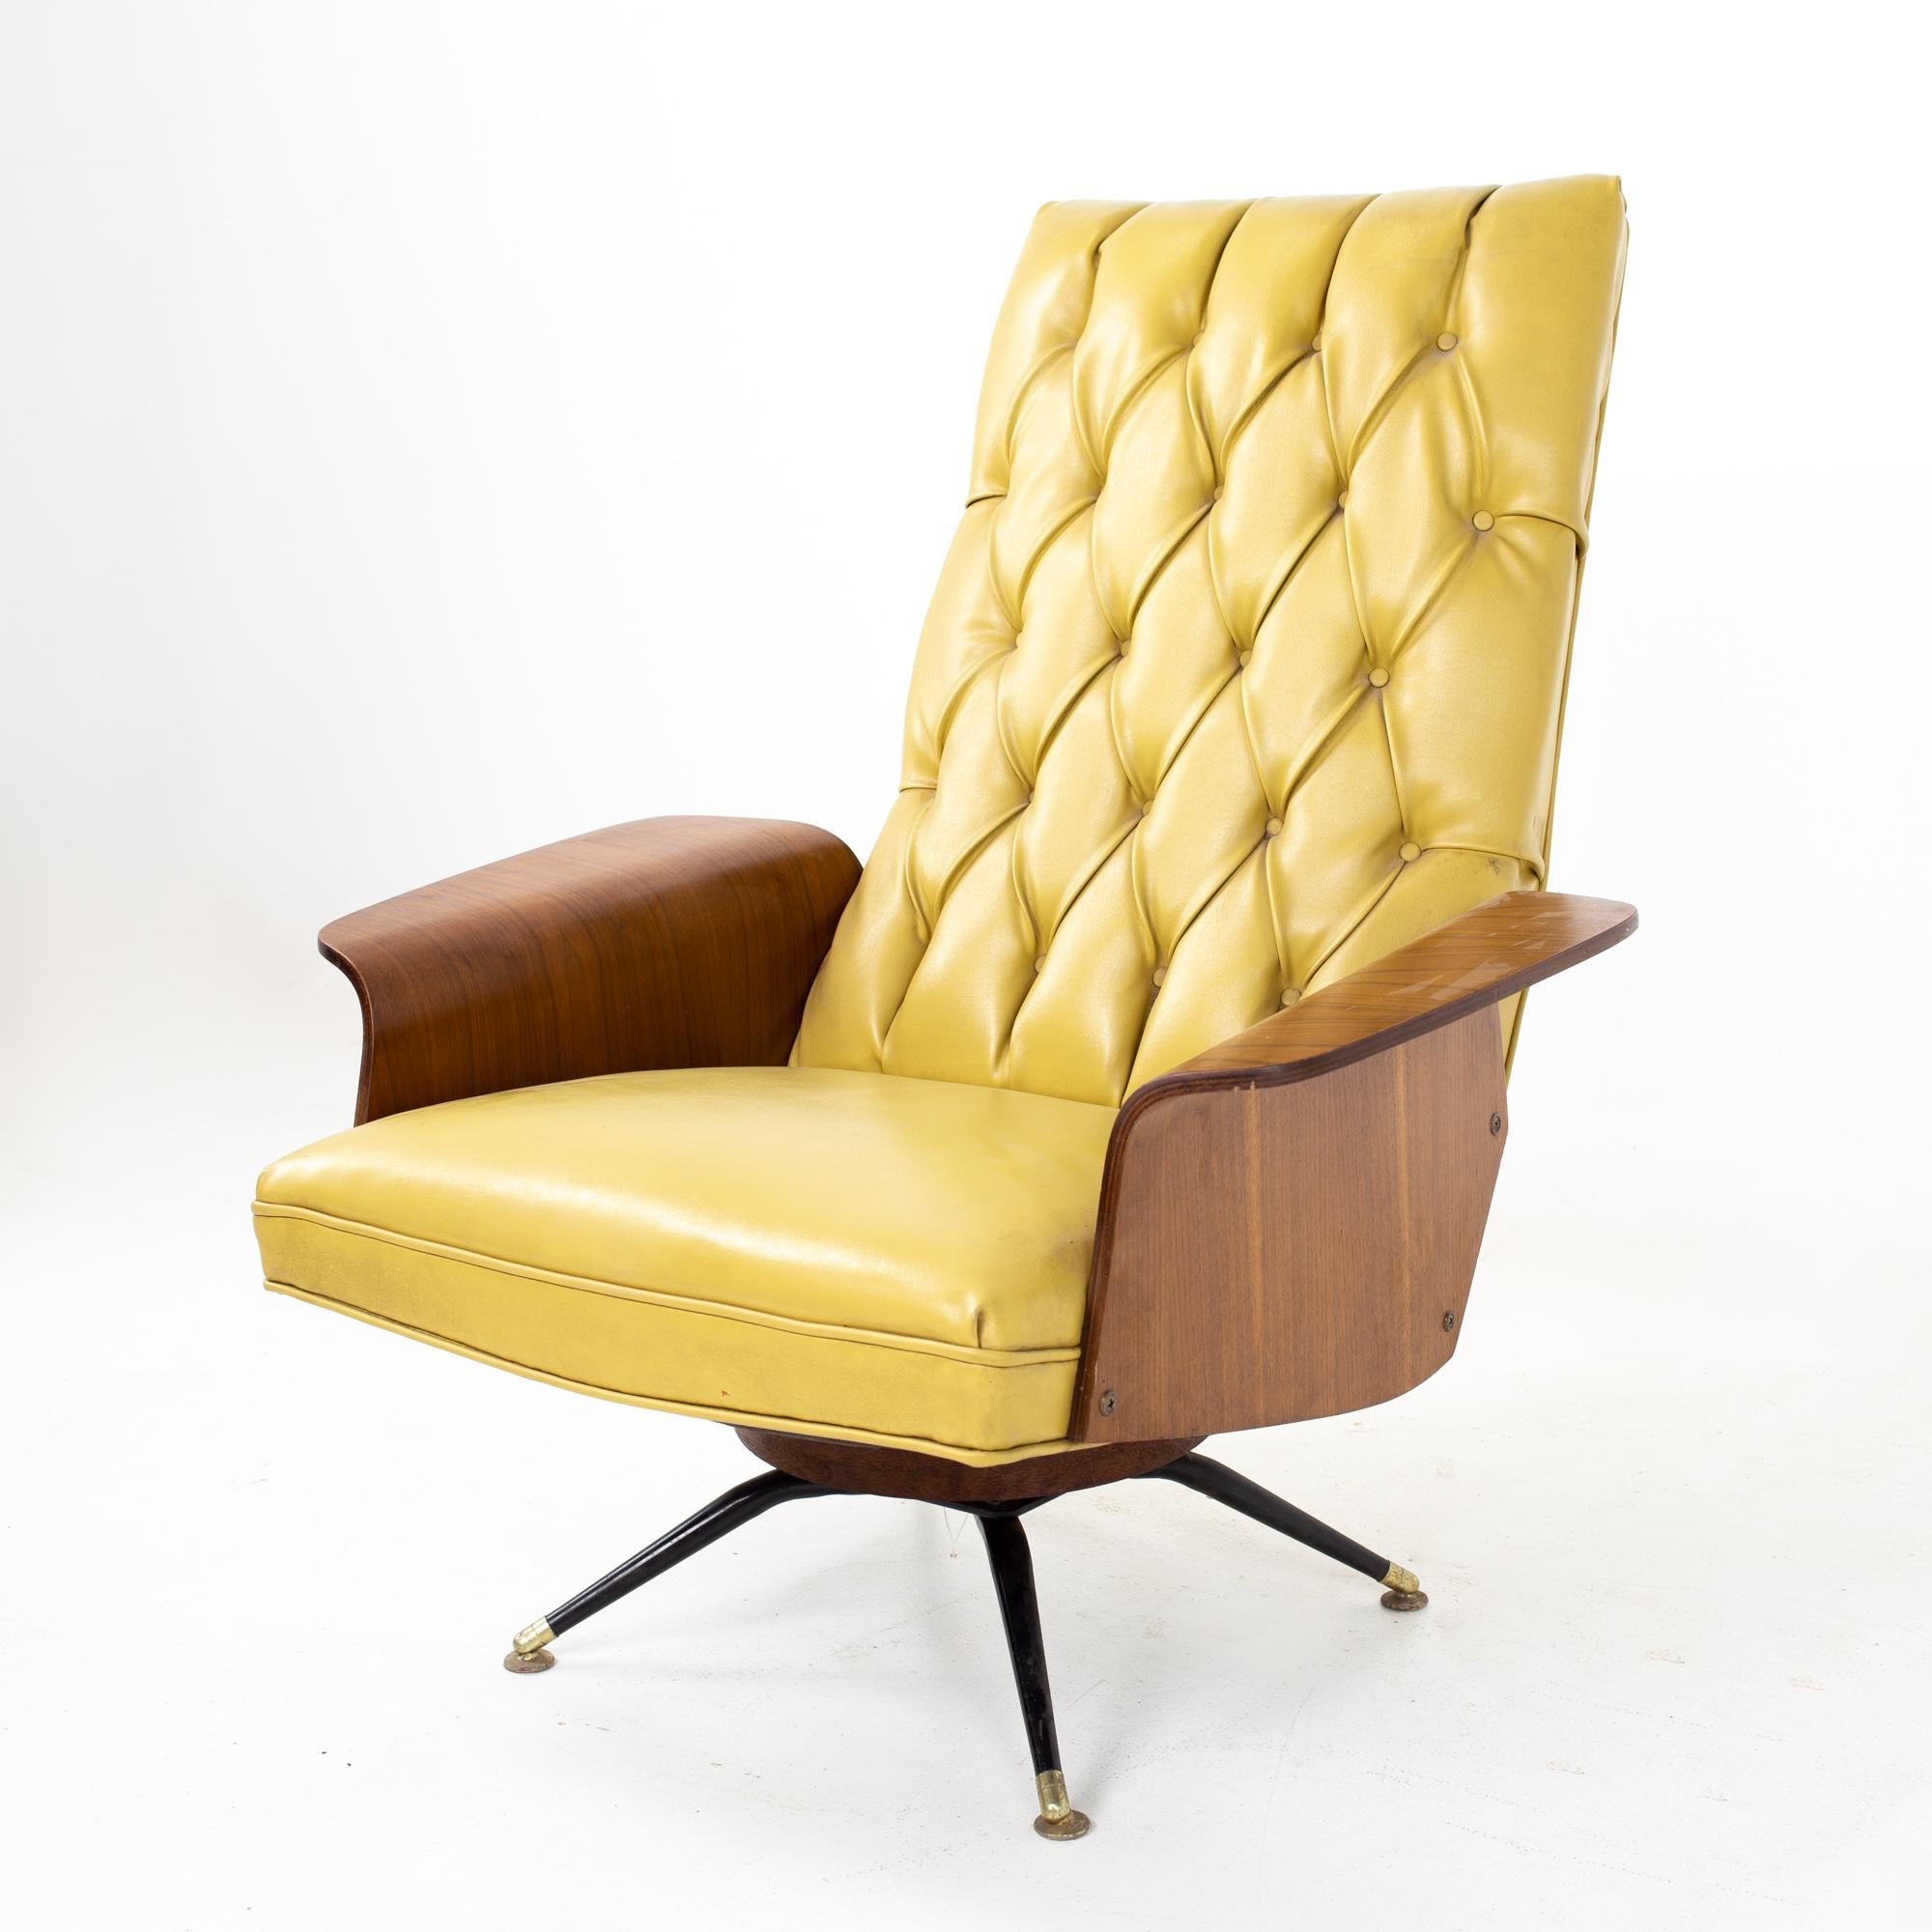 George Mulhauser for Plycraft Mister chair style mid century lounge chair
Chair measures: 32.5 wide x 33.5 deep x 39 high, with a seat height of 14.75 inches

All pieces of furniture can be had in what we call restored vintage condition. That